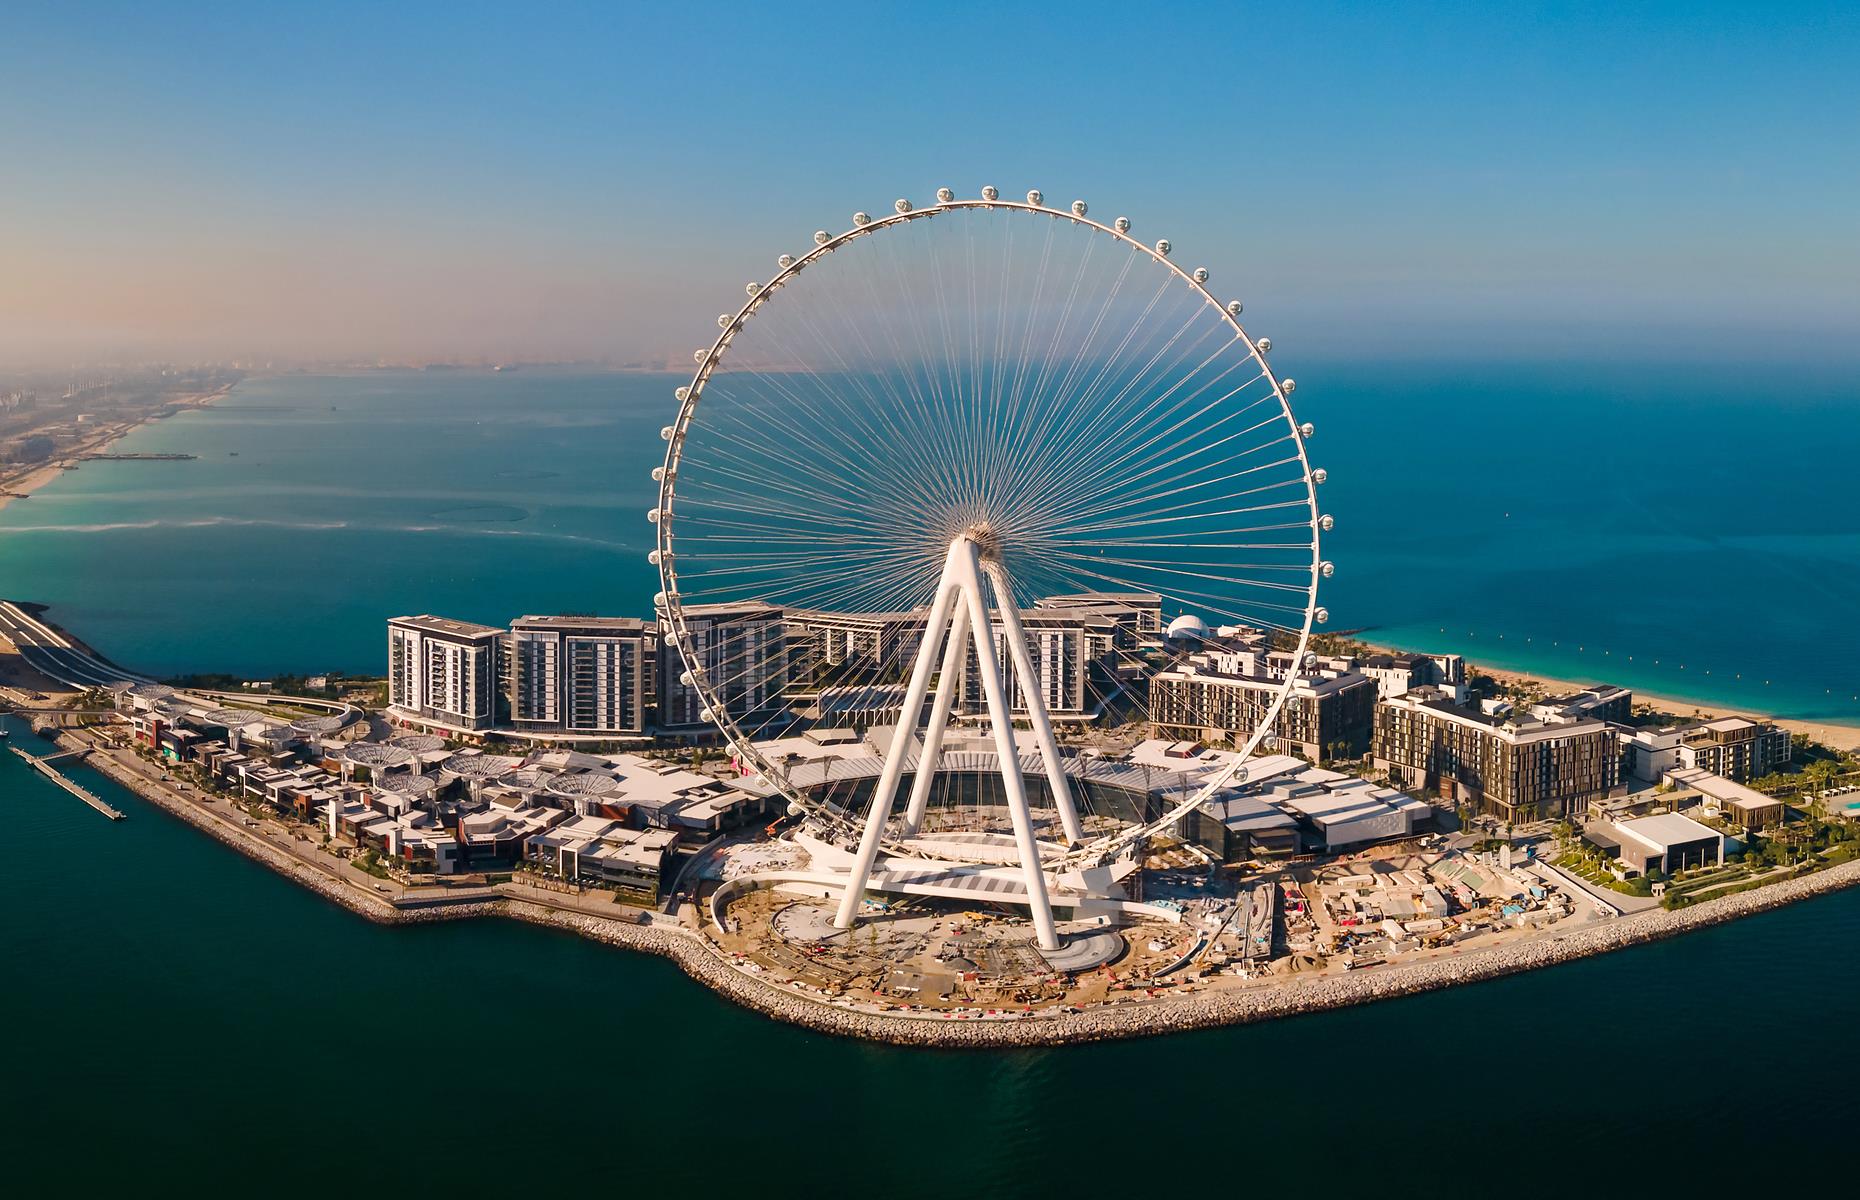 <p>The highest and biggest observation wheel in the world is the latest addition to Dubai’s record-breaking skyline. It opened on Bluewaters Island, an artificial island just off the coast at the Jumeirah Beach Residence and the Dubai Marina, and takes the mantle off the High Roller in Las Vegas. At 820 feet (250m), it is 270 feet (82m) taller than Sin City's giant Ferris wheel and contains 11,200 tons of steel. <a href="https://www.aindubai.com/en">Ain Dubai</a> has 48 capsules and each can accommodate up to 40 people.</p>